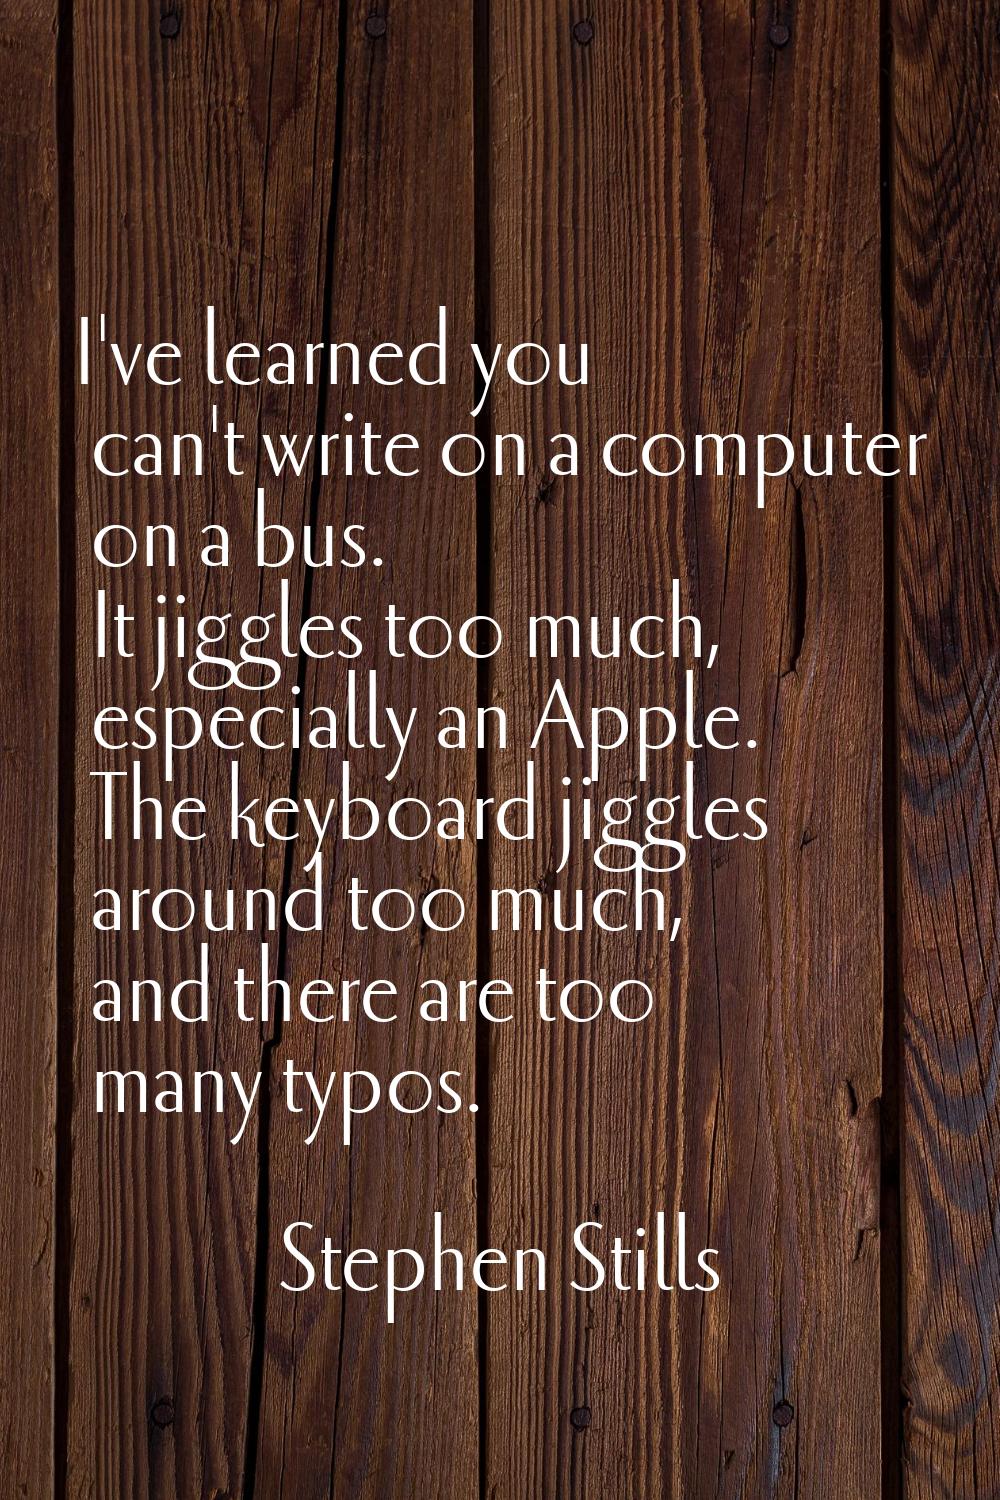 I've learned you can't write on a computer on a bus. It jiggles too much, especially an Apple. The 